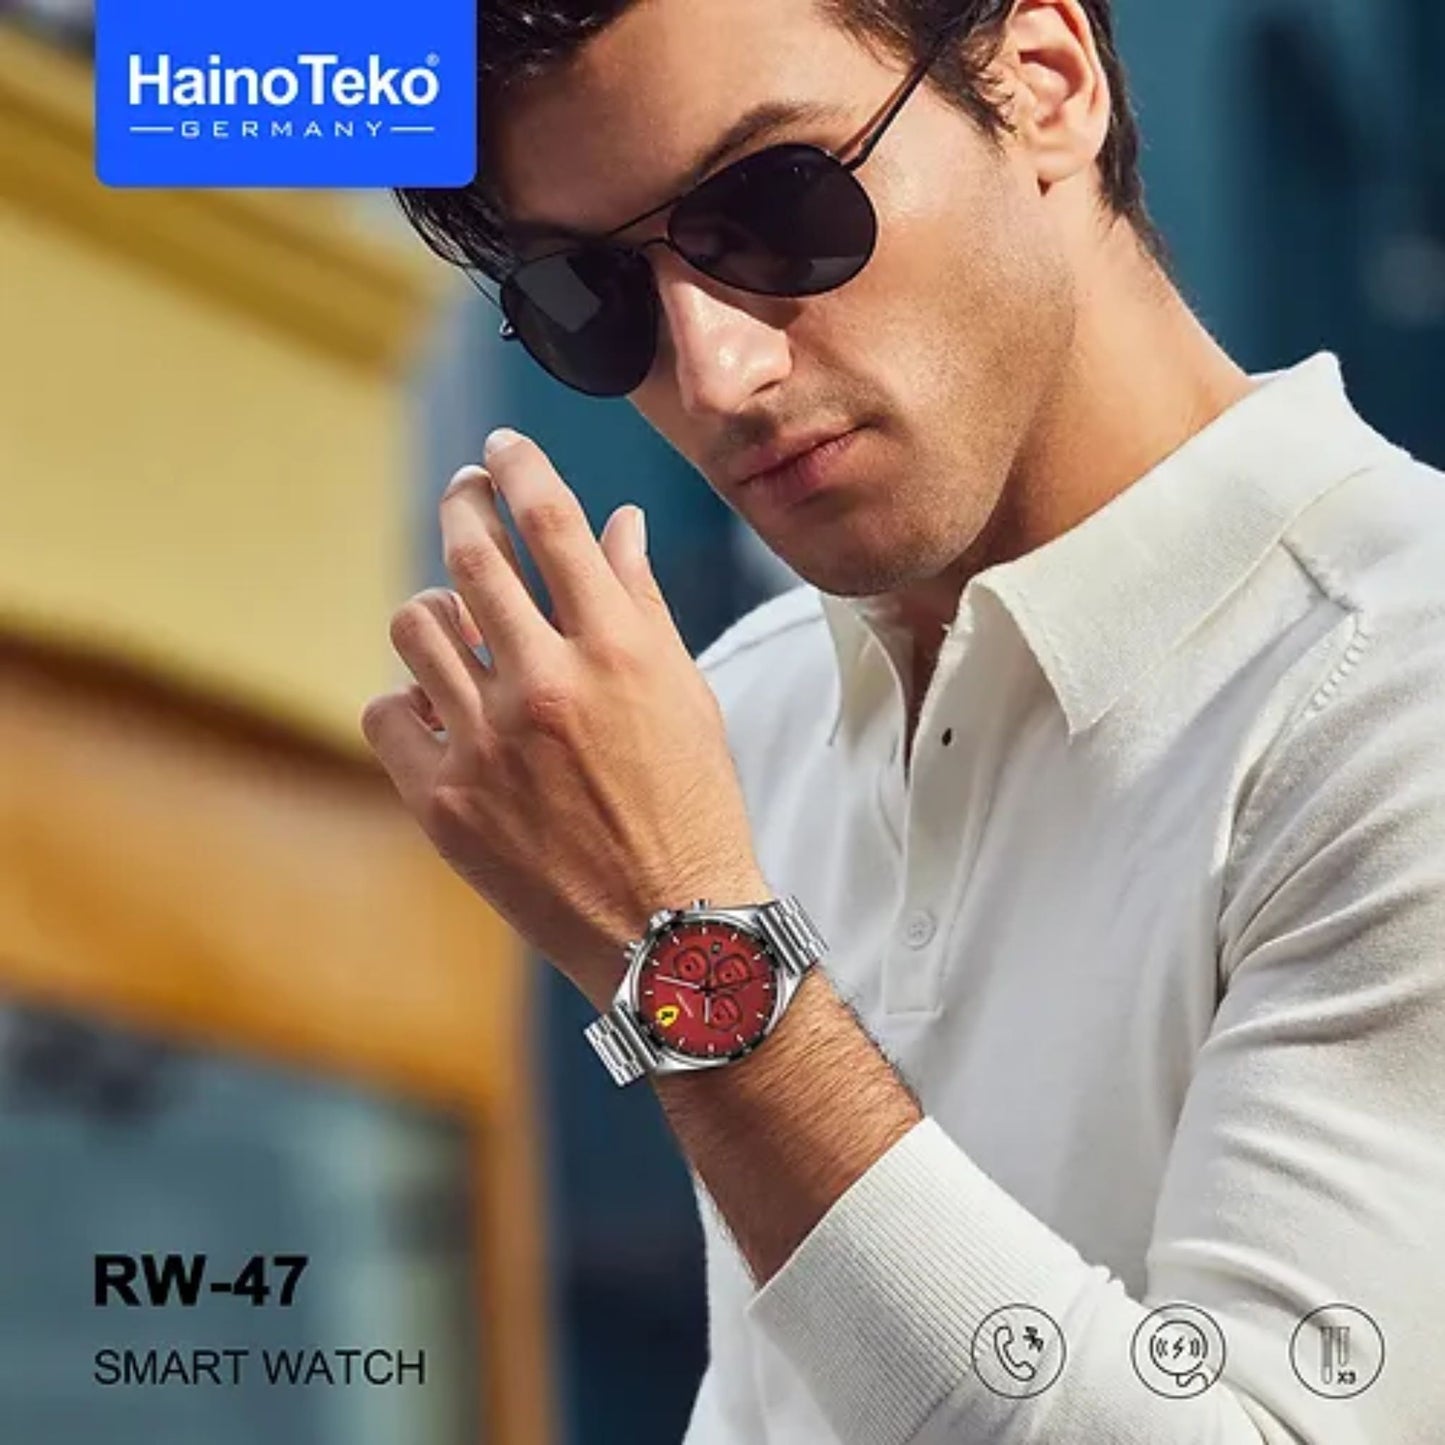 Premium Haino teko RW47 with 3 Bands(Stainless Steel + Leather + Silicone)Smartwatches Limited Edition_Black